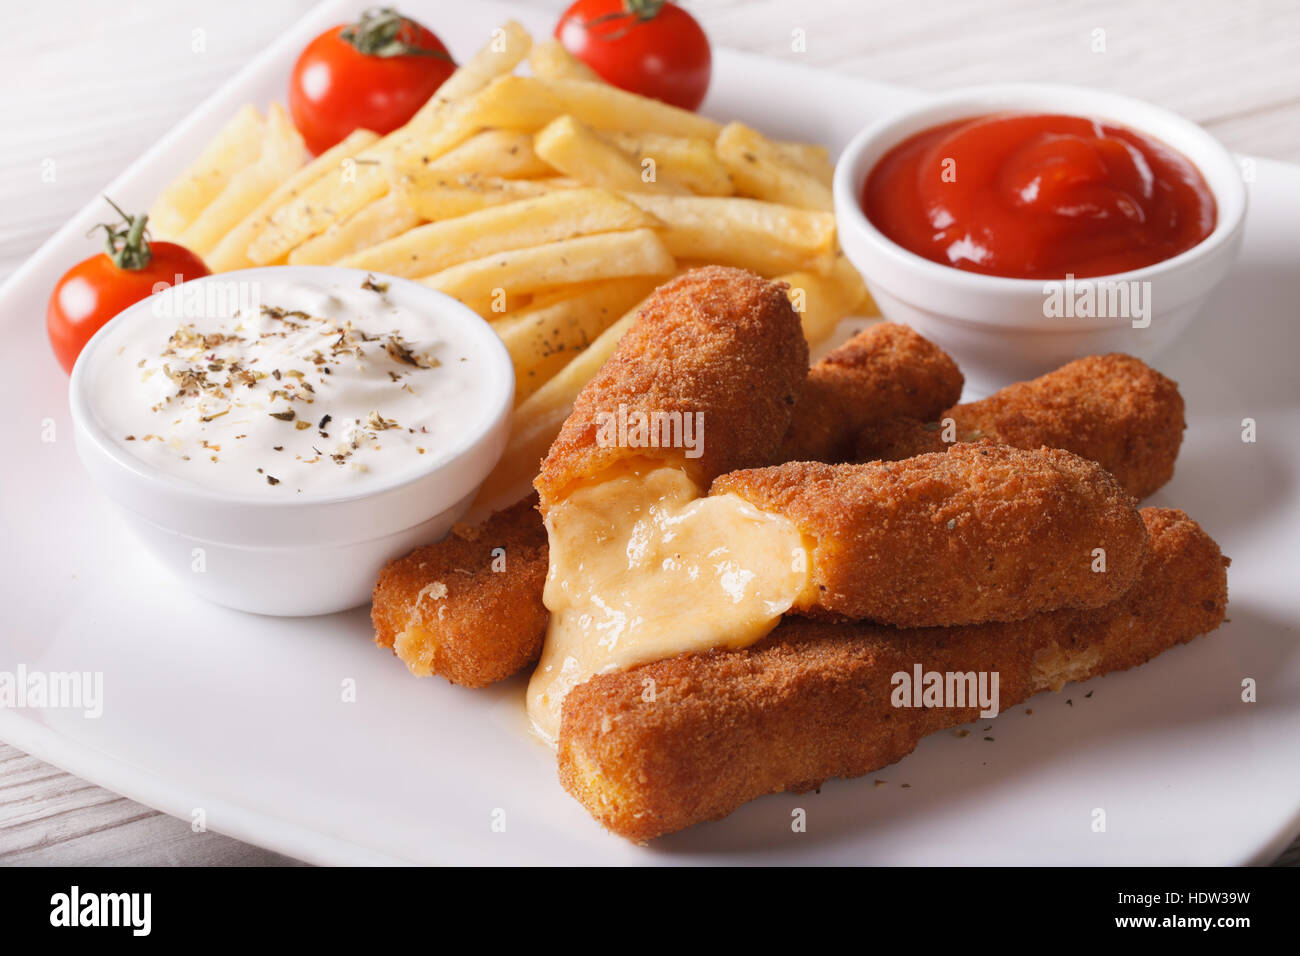 fried cheese and fries with sauce on a plate close-up, horizontal Stock Photo